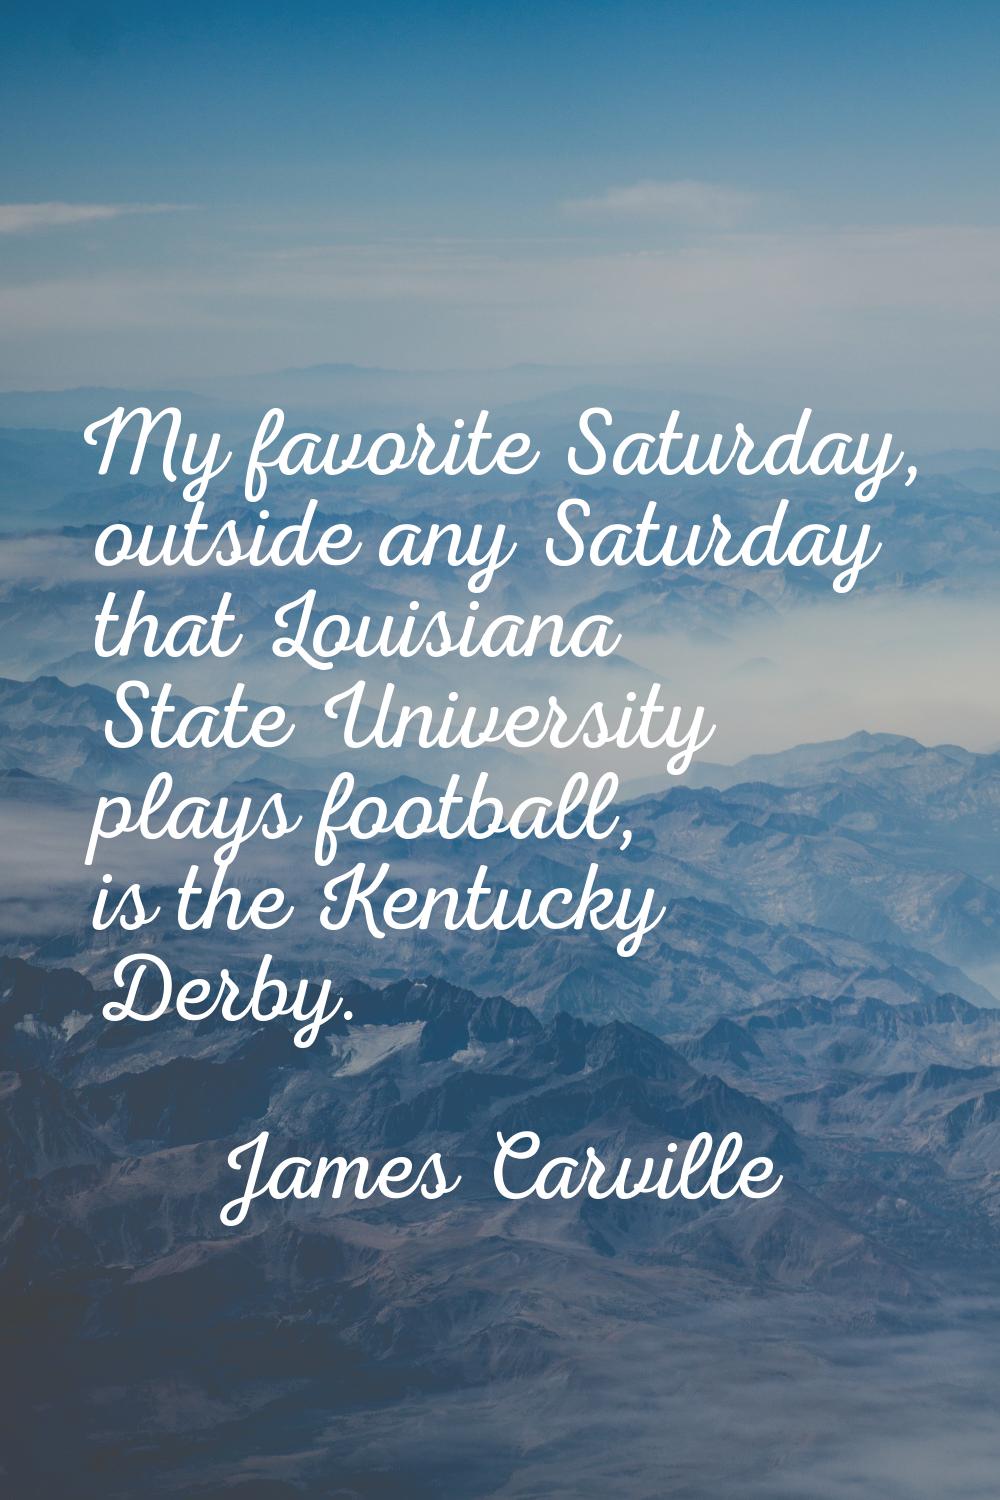 My favorite Saturday, outside any Saturday that Louisiana State University plays football, is the K